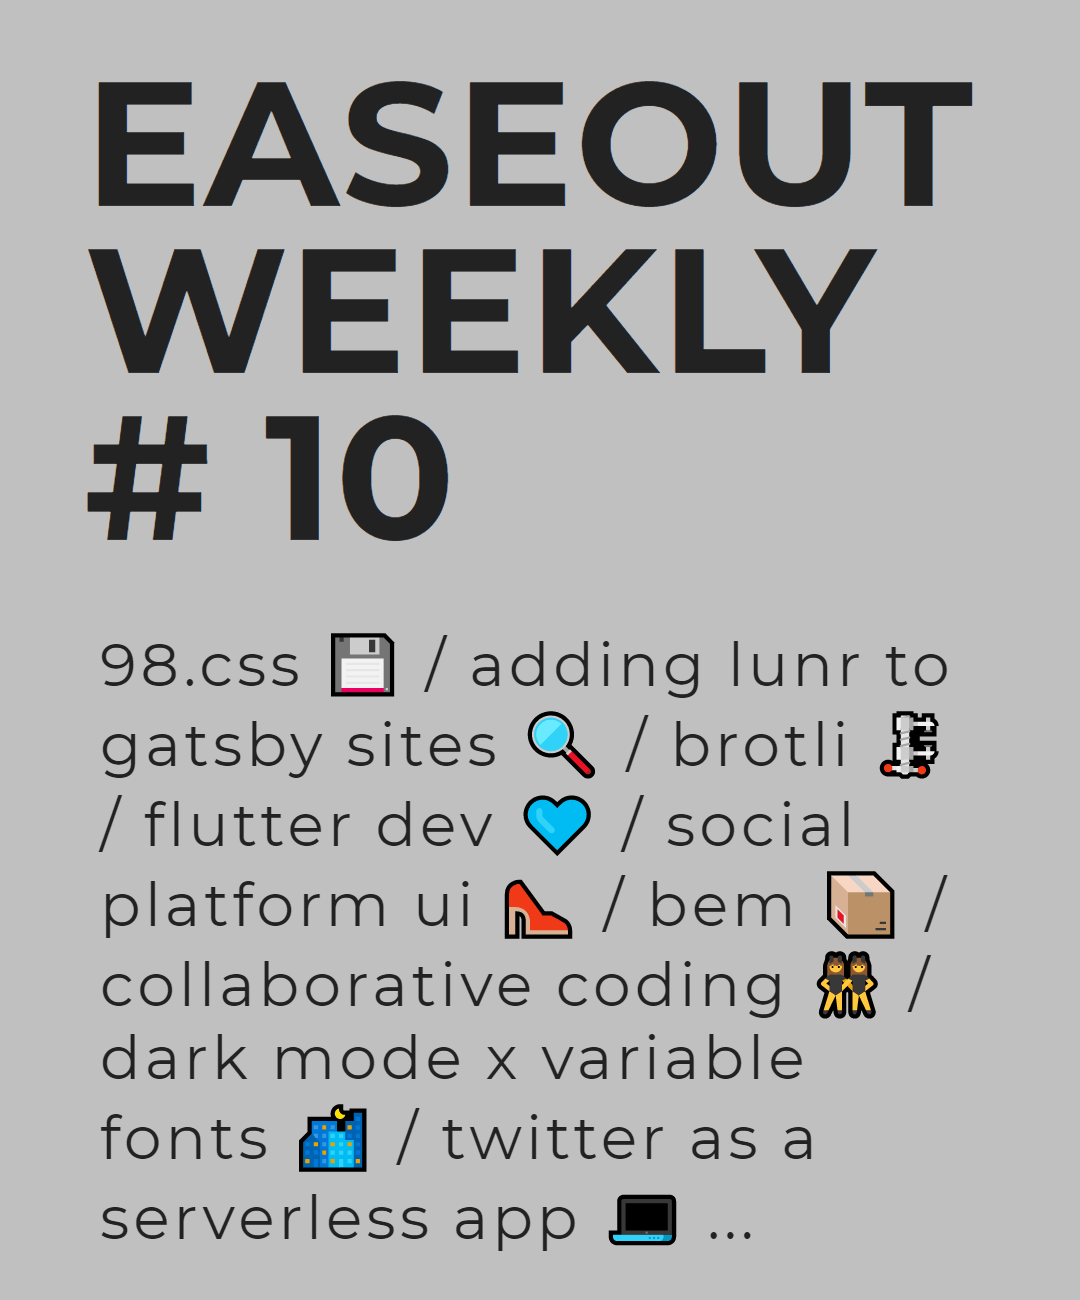 Easeout Weekly #10